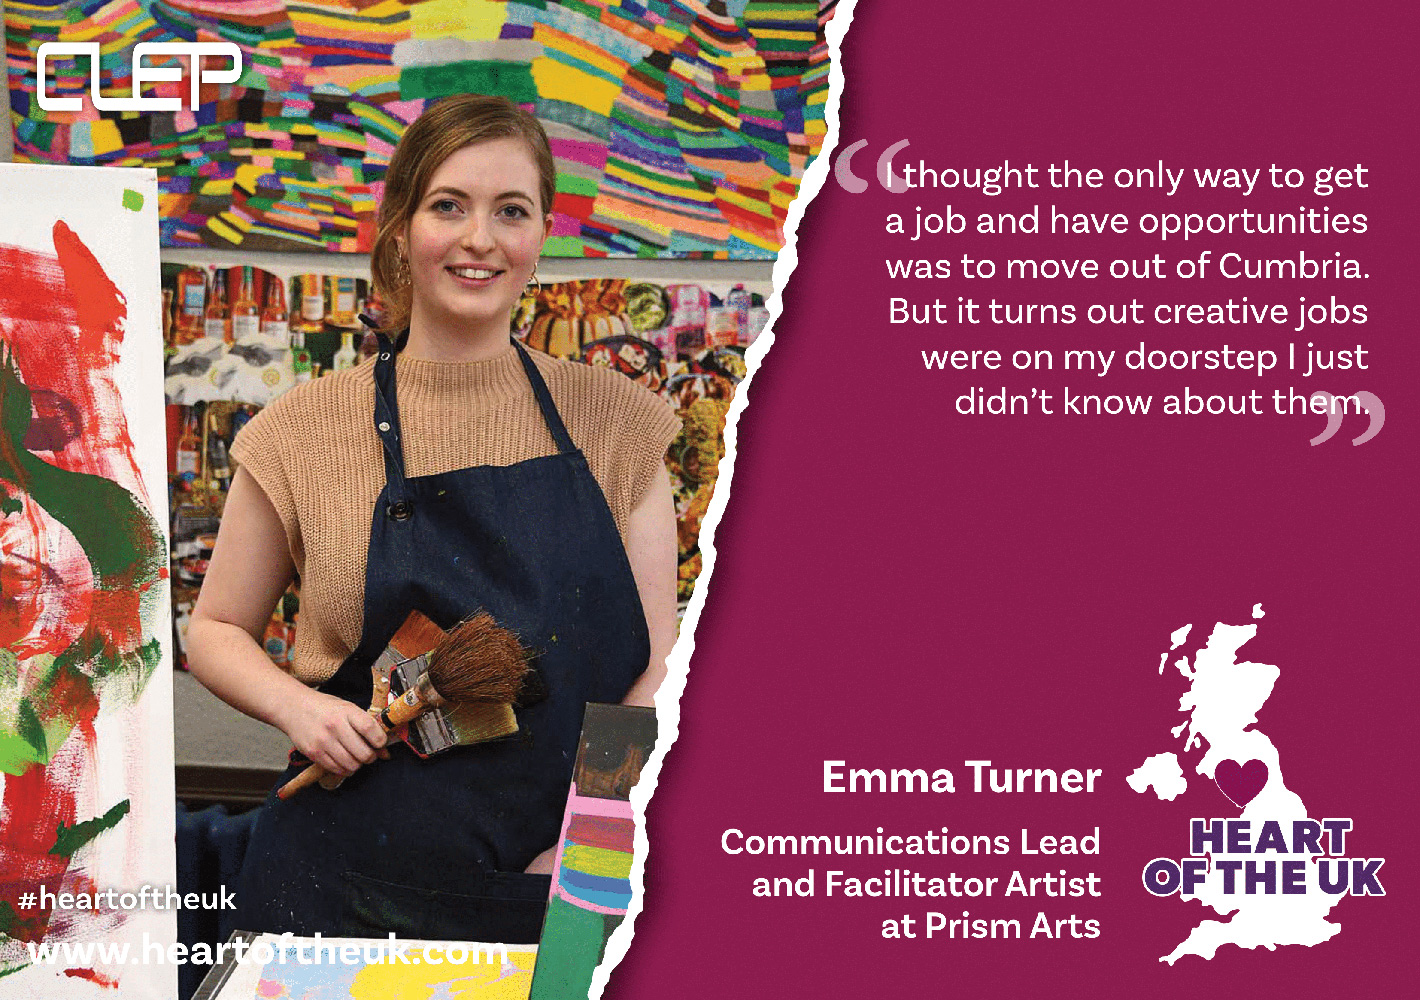 Heart of the UK: It turns out creative jobs were on my doorstep, I just didn't know about them. (Photo of Emma Turner)